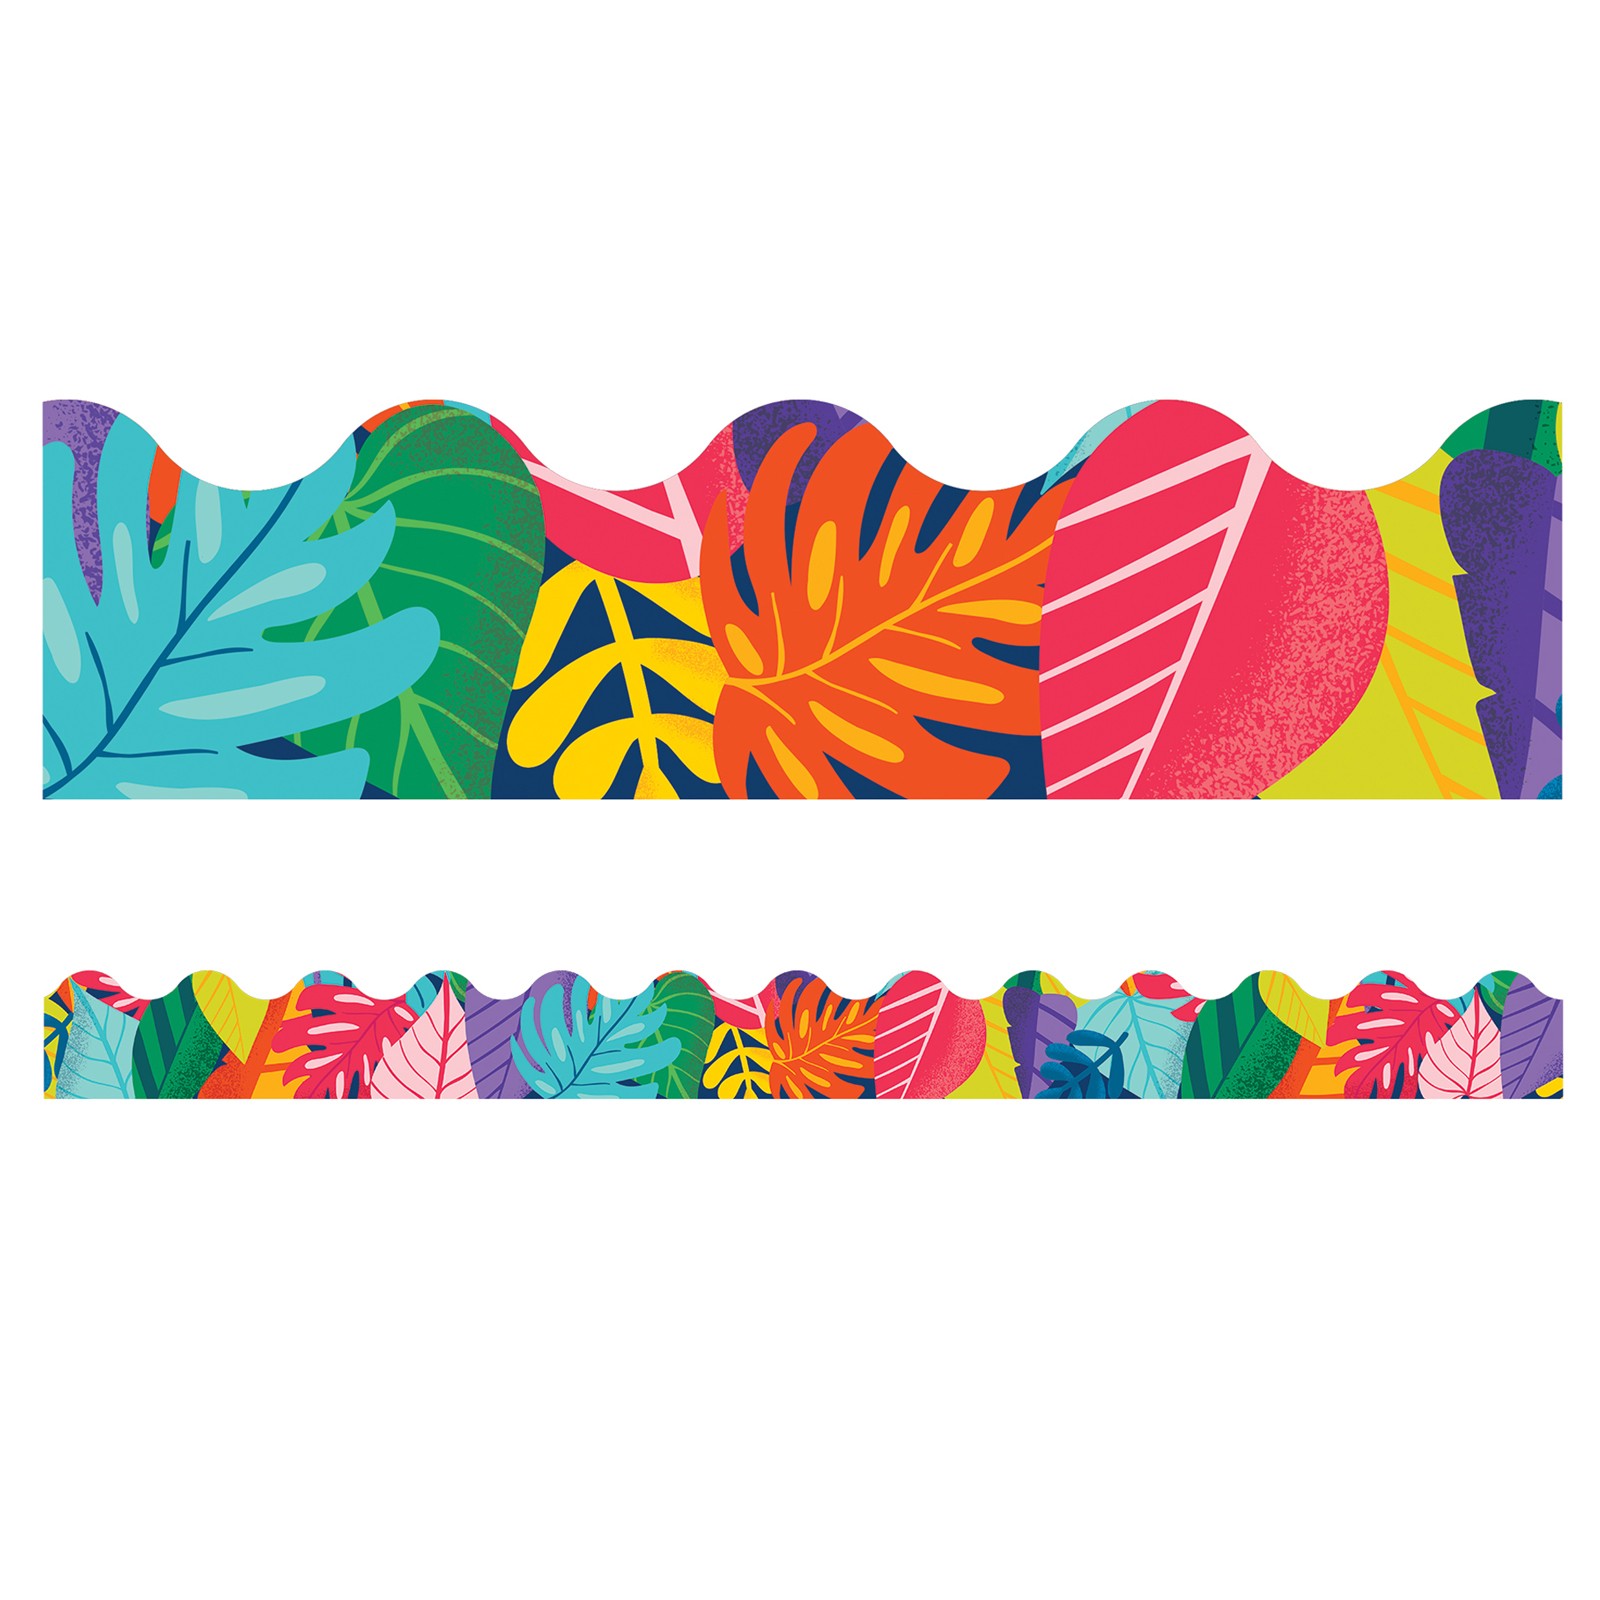 One World Colorful Leaves Scalloped Border, 39 Feet